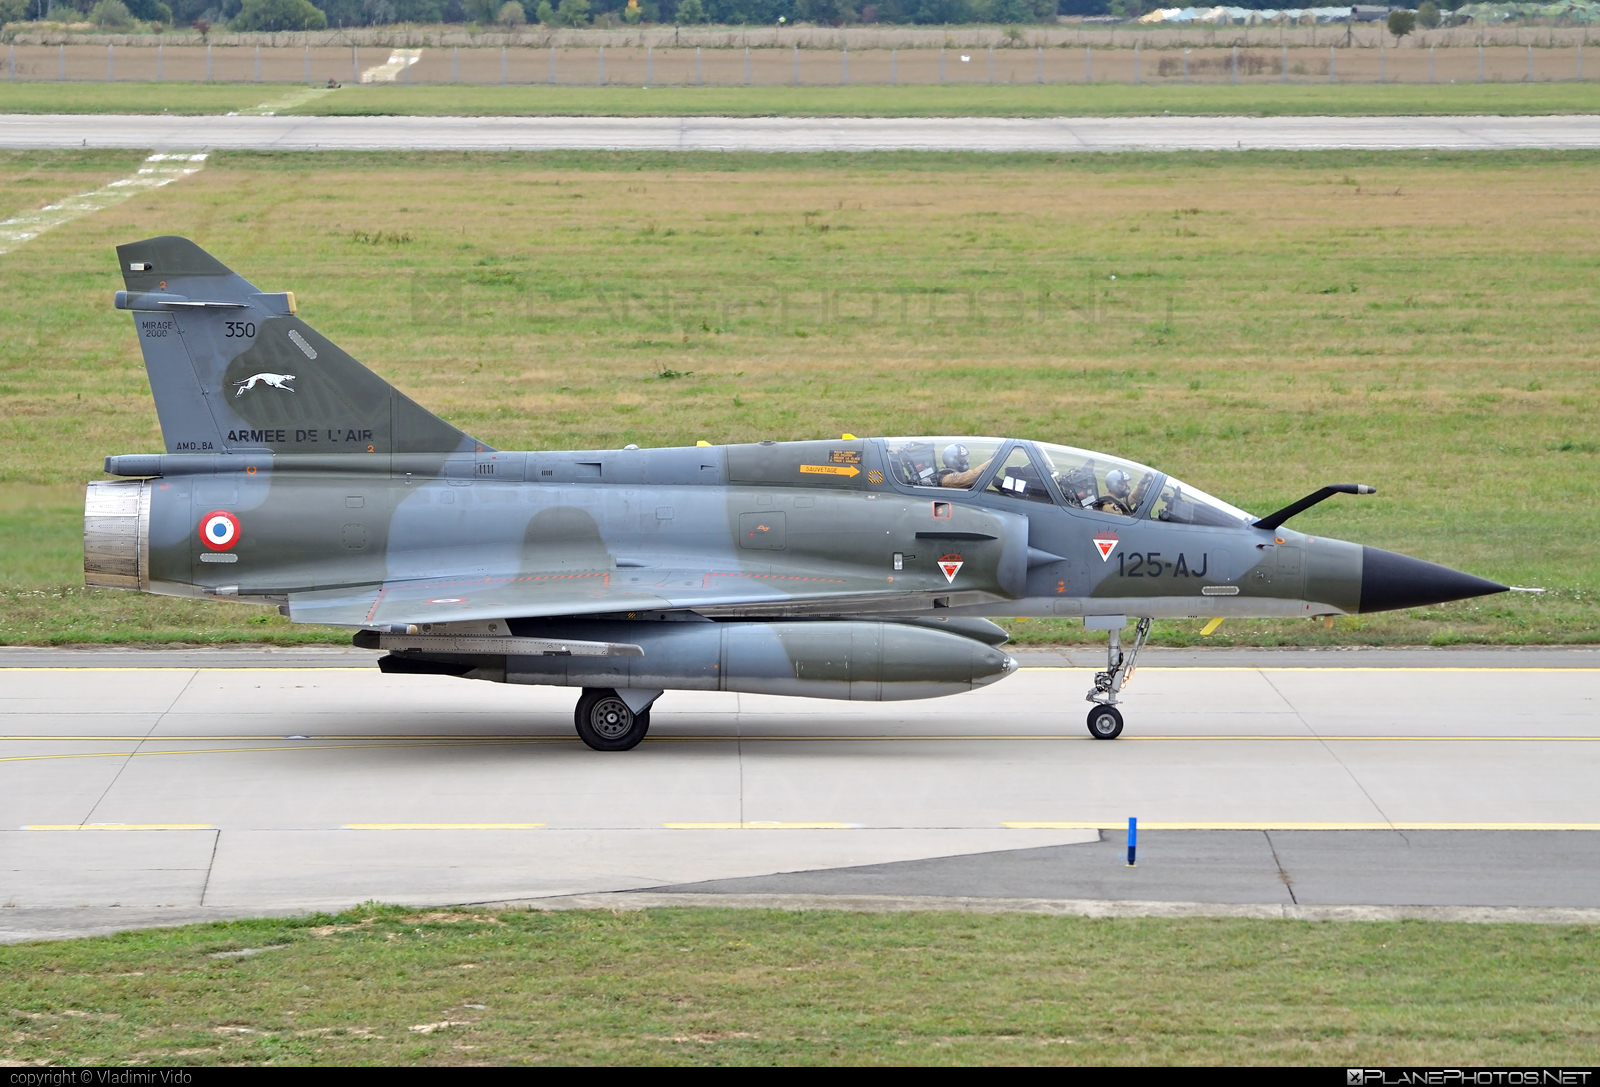 Dassault Mirage 2000N - 350 operated by Armée de l´Air (French Air Force) #DassaultMirage #DassaultMirage2000 #DassaultMirage2000n #armeedelair #dassault #frenchairforce #mirage #mirage2000 #mirage2000n #natodays #natodays2015